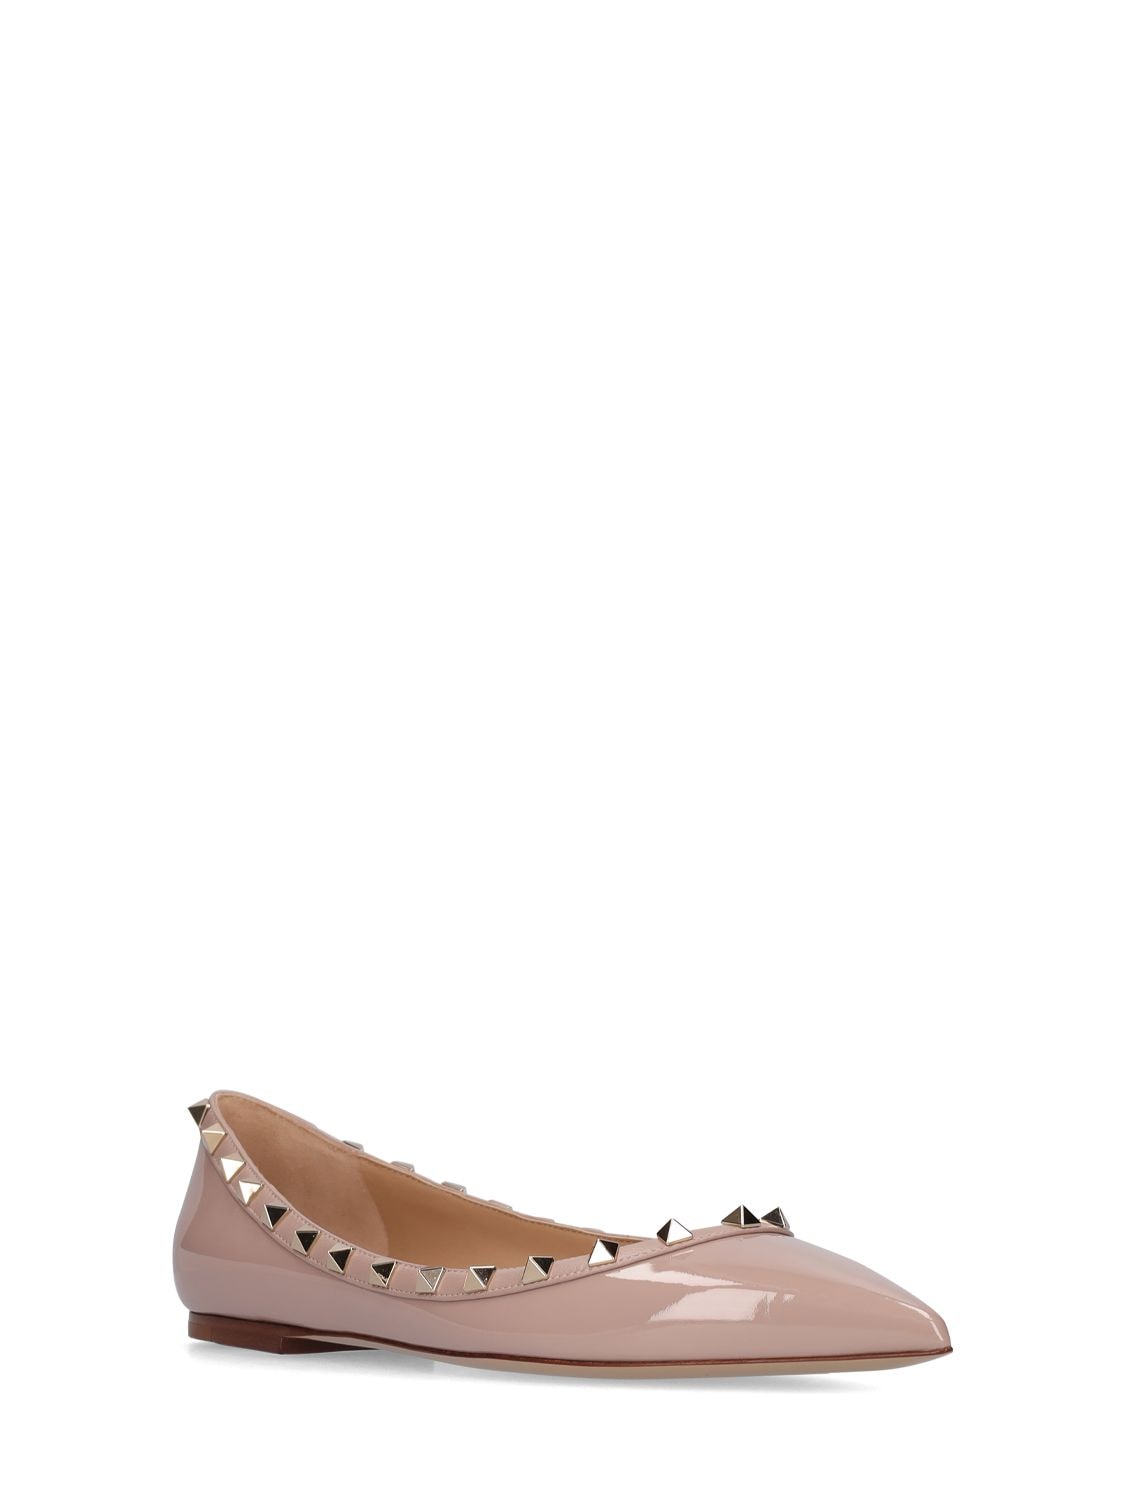 Shop Valentino 10mm Rockstud Patent Leather Flats In Poudre